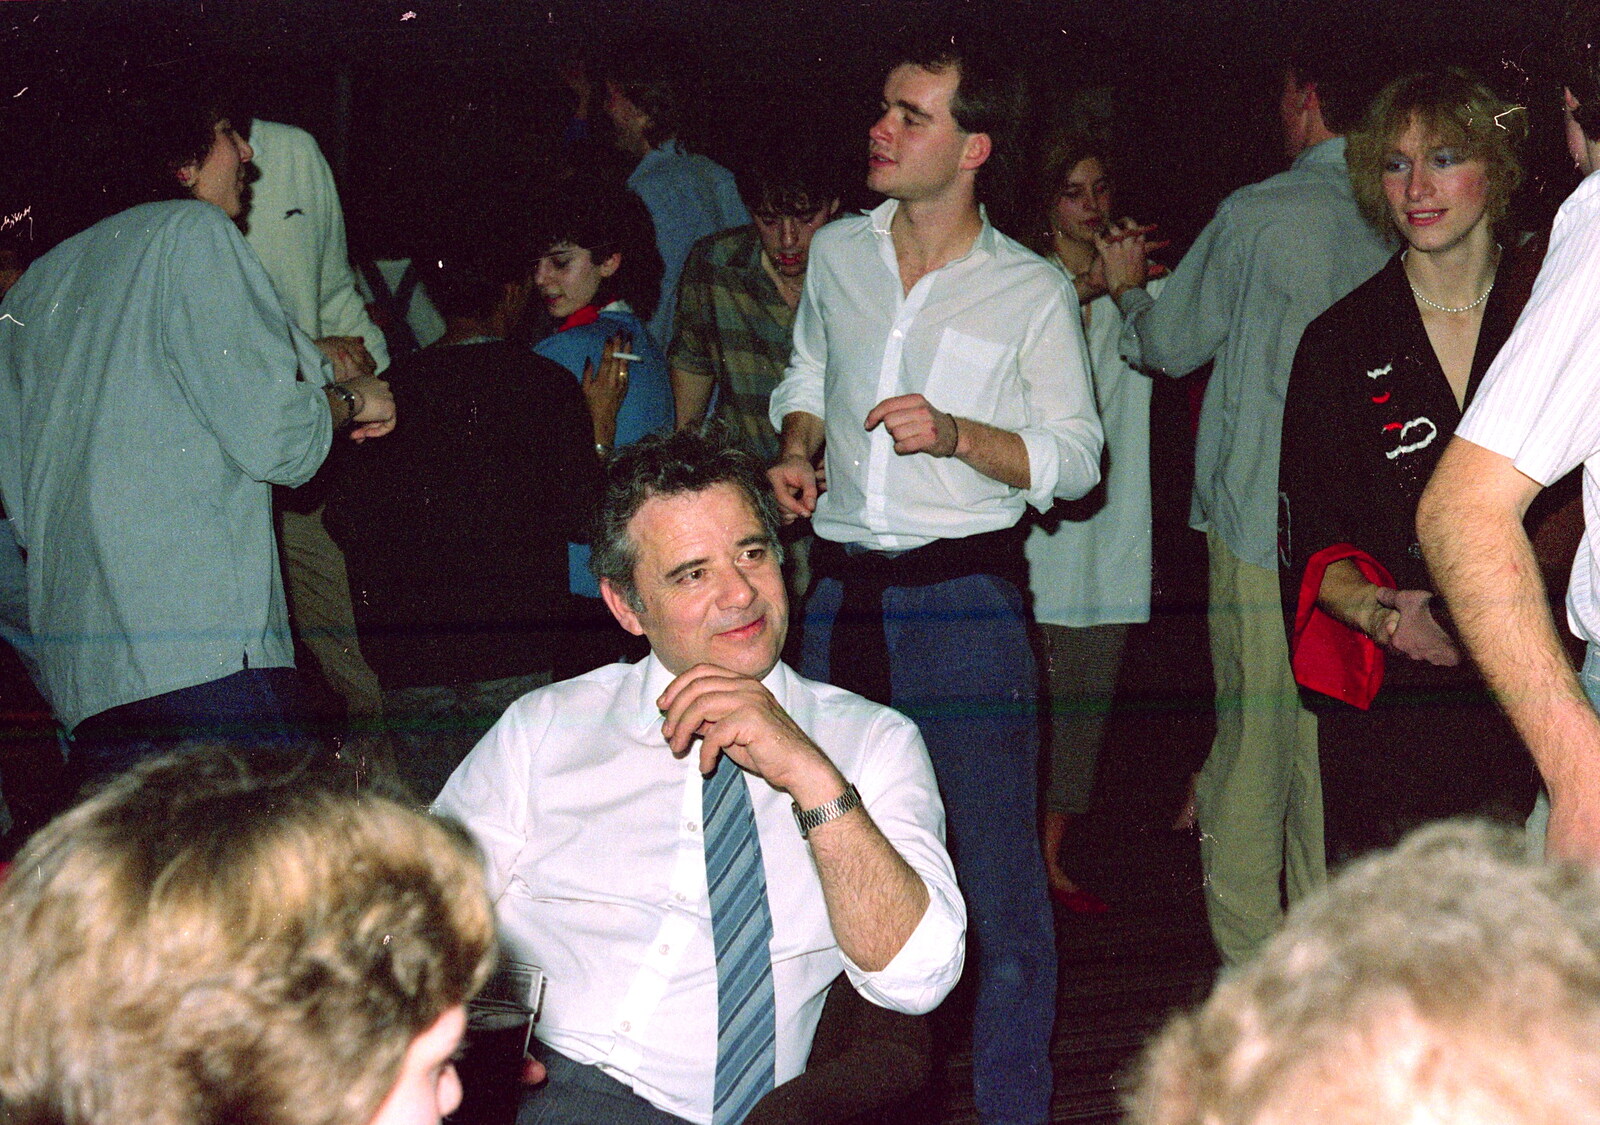 Brian Smith, lecturer, sits back from Uni: The Fly Christmas Party and BABS Panto, Plymouth Polytechnic, Devon - December 11th 1985